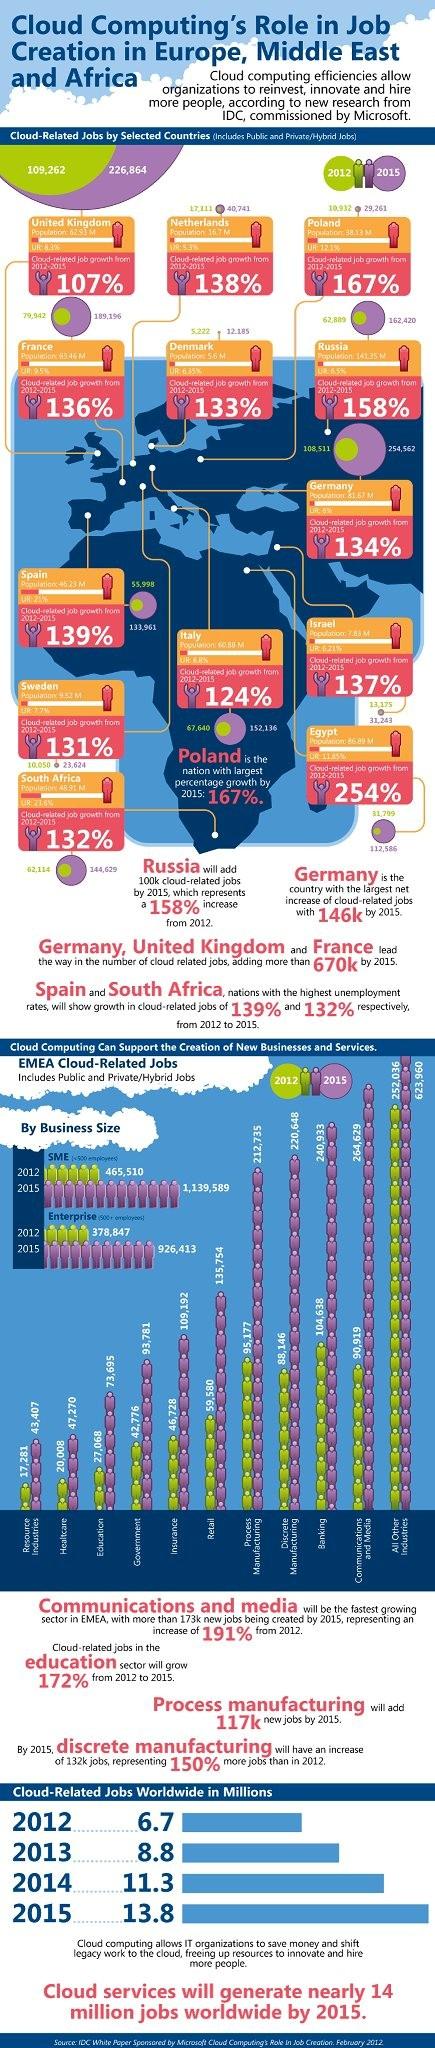 Cloud Computing Jobs Creation in Europe and Africa